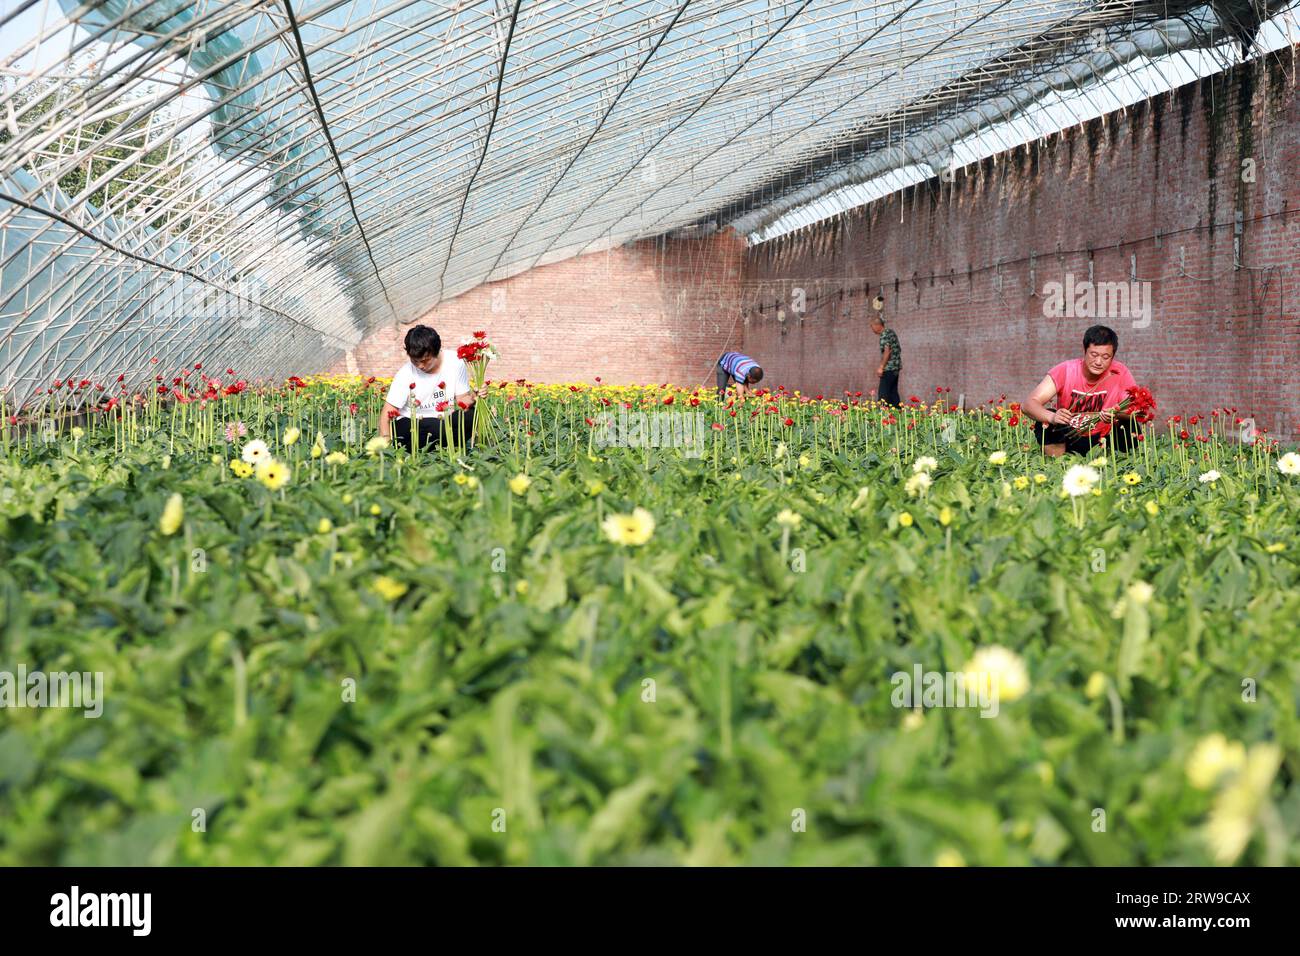 Luannan County, China - July 31, 2019: Flower growers are collecting African chrysanthemum in the garden, Luannan County, Hebei Province, China Stock Photo